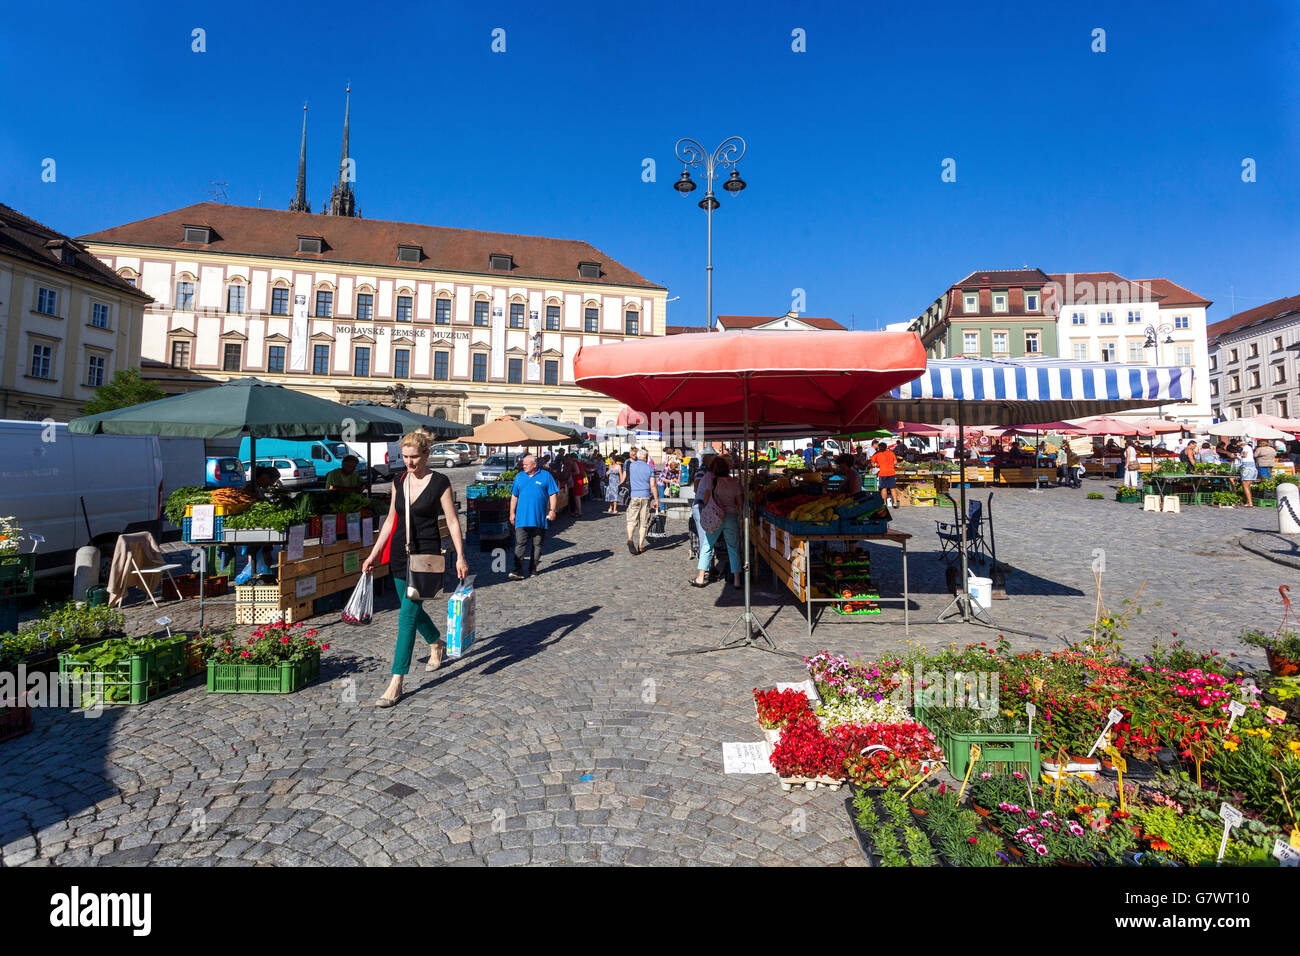 Zelny trh - square, Cabbage Market square is traditional markets with fruits, vegetables, and flowers. Brno, South Moravia, Czech Republic Stock Photo